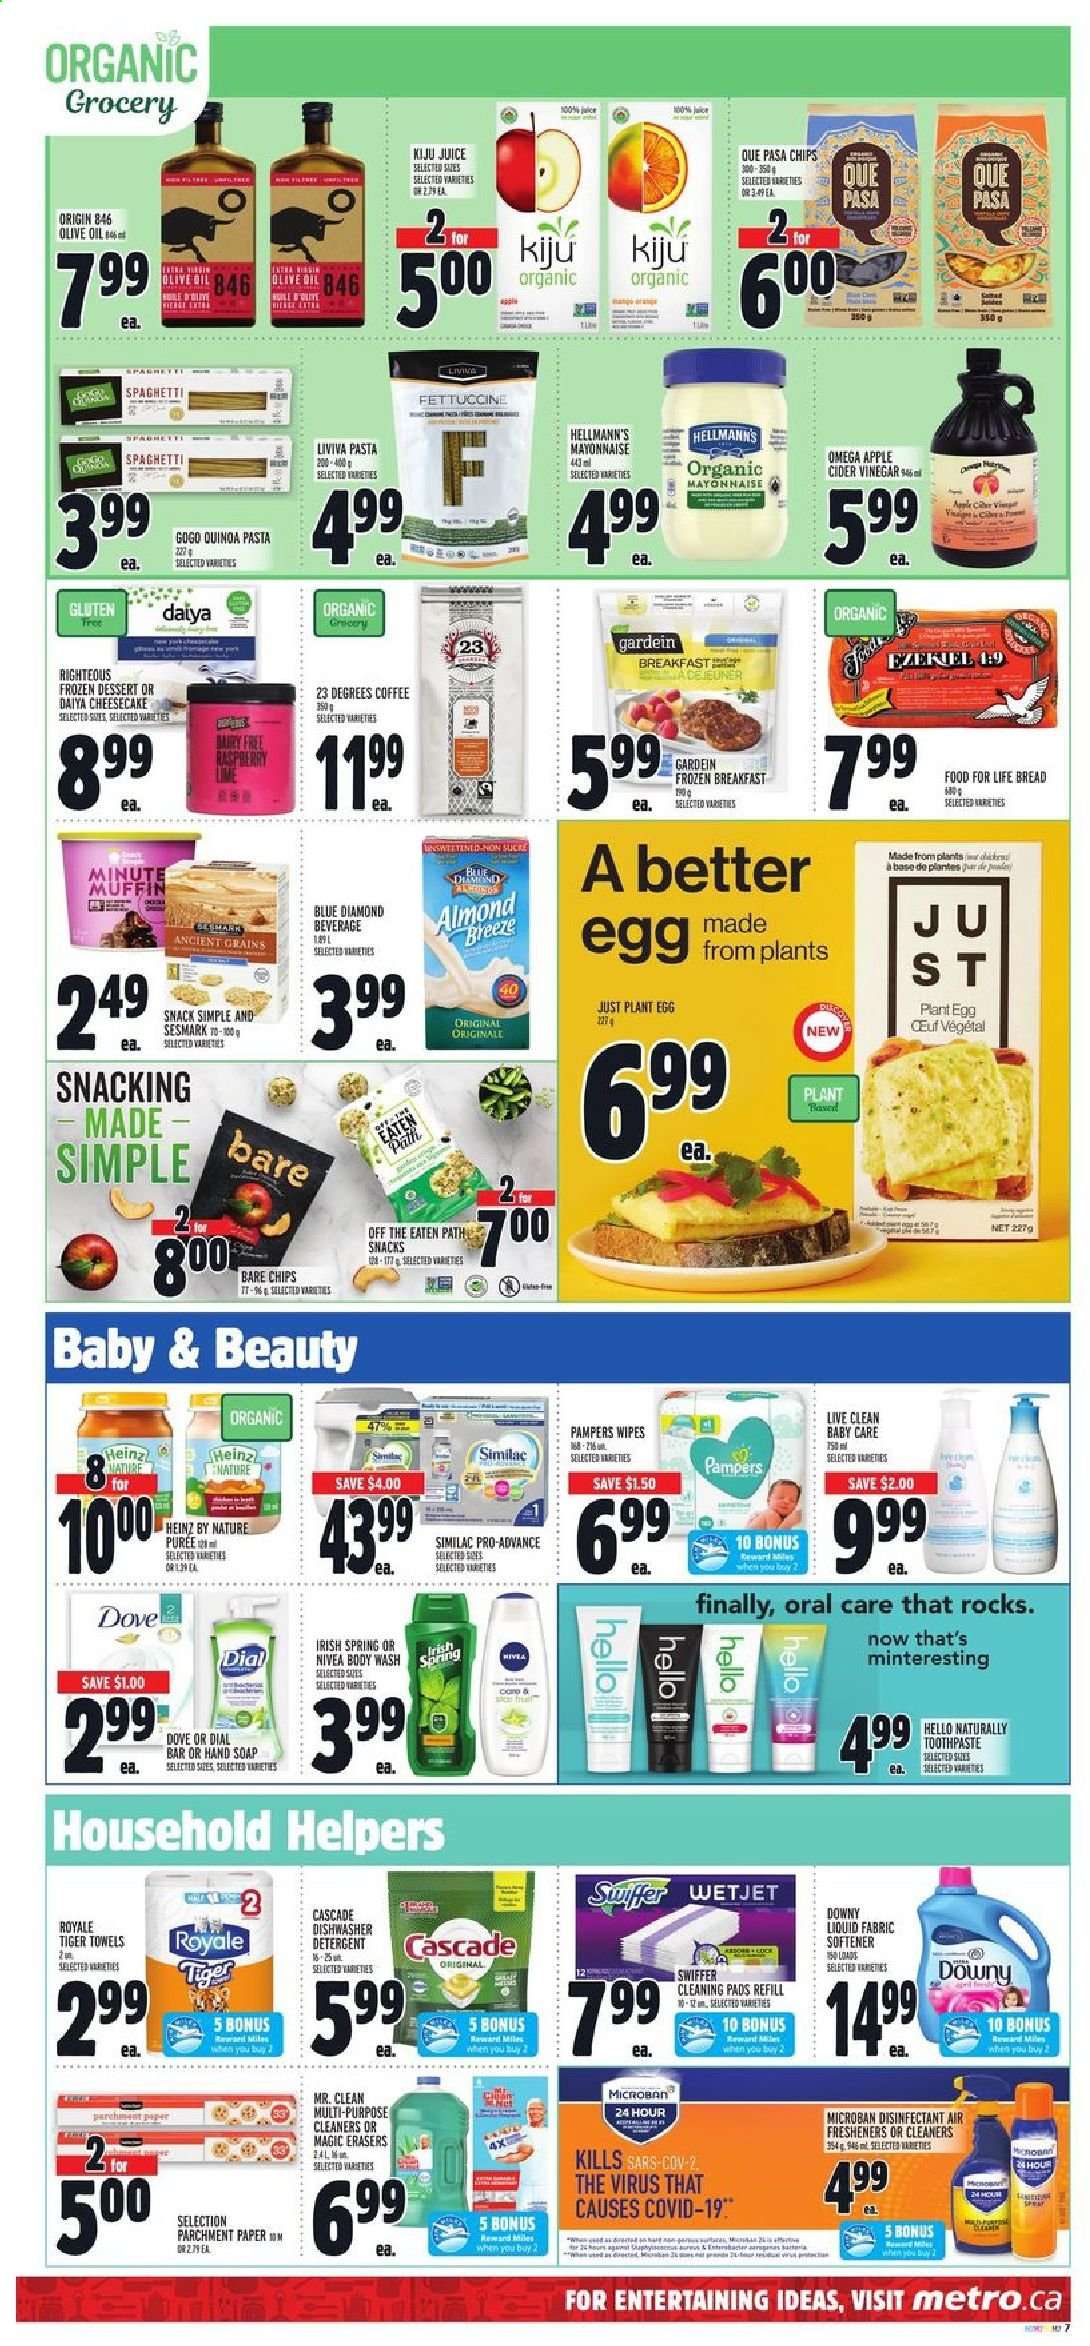 thumbnail - Metro Flyer - April 08, 2021 - April 14, 2021 - Sales products - cheesecake, muffin, spaghetti, pasta, Almond Breeze, eggs, mayonnaise, Hellmann’s, snack, Heinz, apple cider vinegar, Blue Diamond, juice, coffee, Similac, wipes, Swiffer, Rin, Cascade, body wash, hand soap, Dial, soap, WetJet, paper, air freshener, towel, quinoa, Pampers, Nivea, desinfection. Page 11.